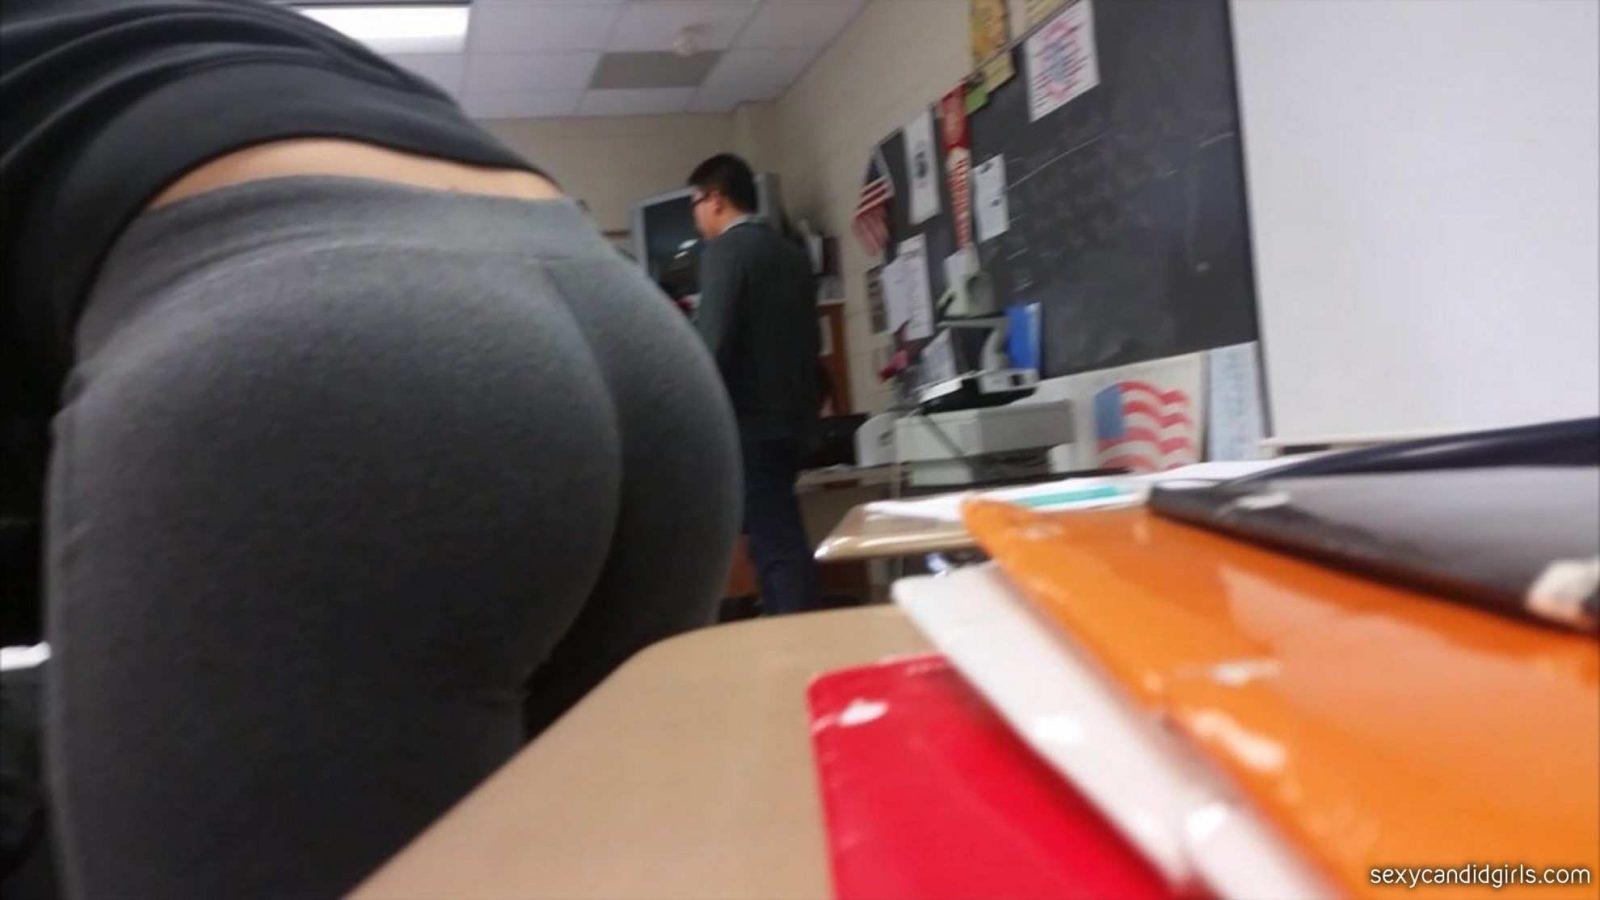 Young Classmate Teen Showing Off Her Candid Ass Sexy Candid Girls